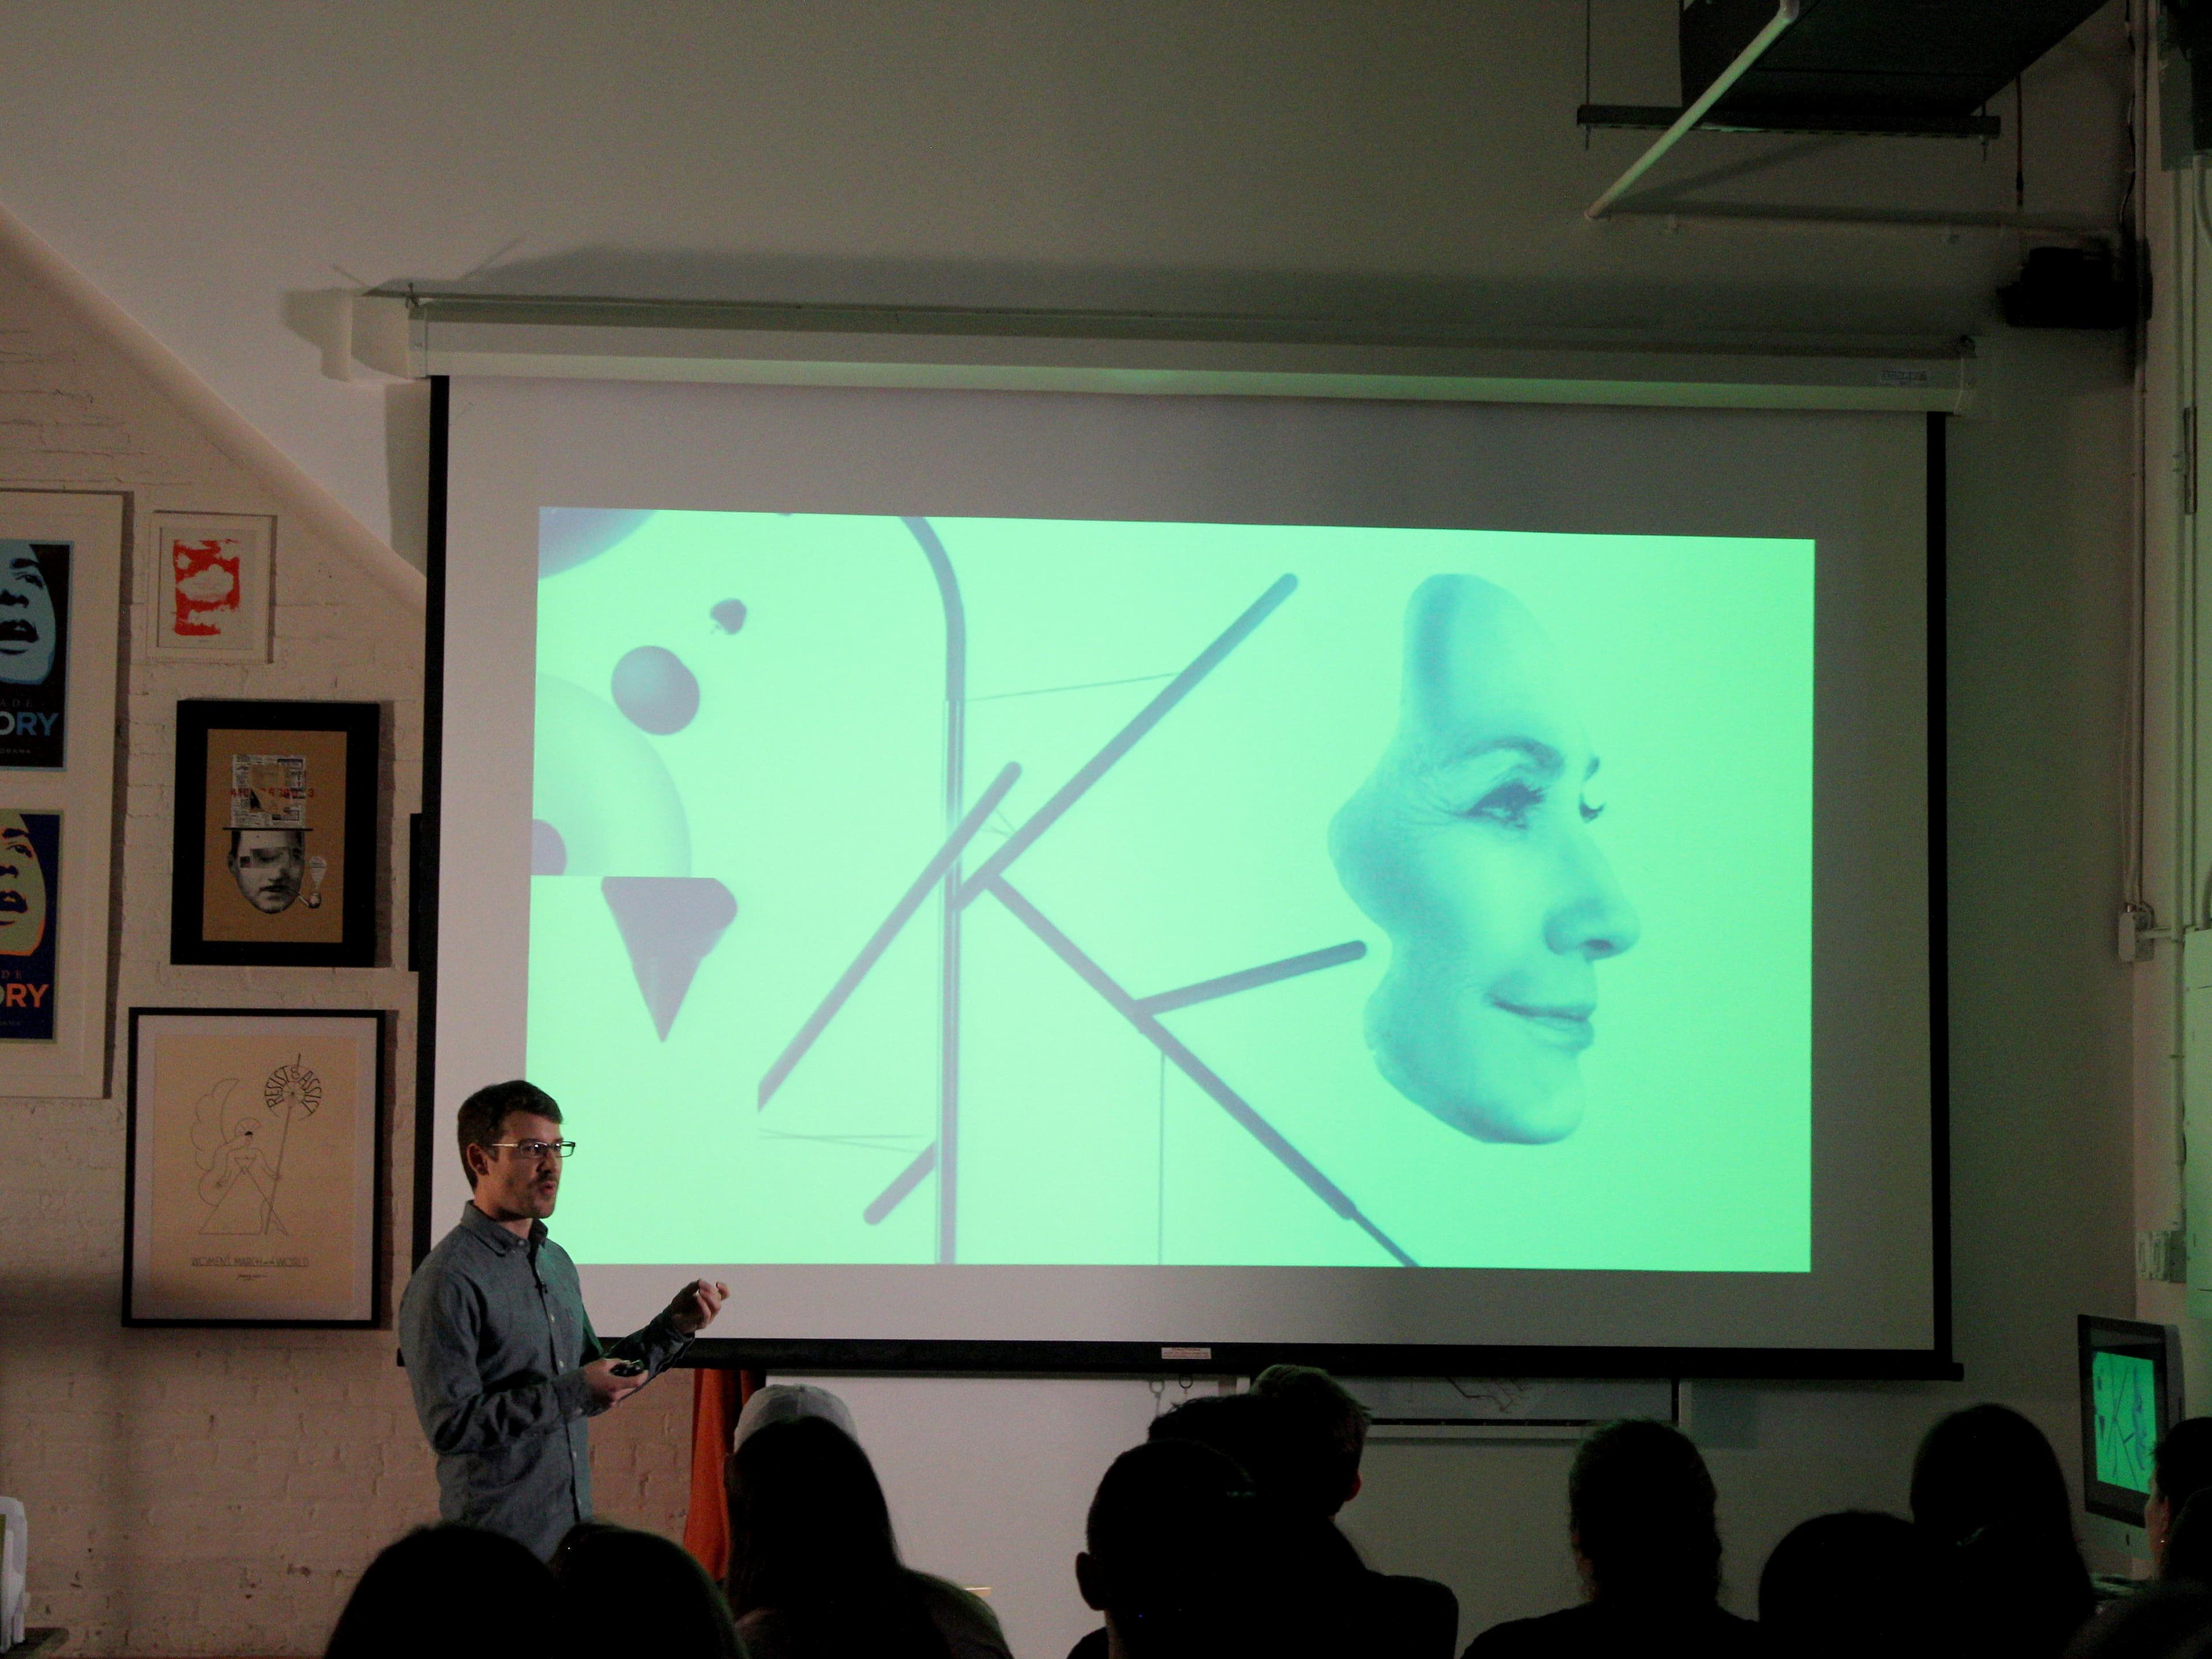 A person is standing and presenting in front of a screen displaying an abstract image with overlapping faces and geometric shapes in green hues. The room has several framed posters on the walls, and an audience is seated facing the presenter.